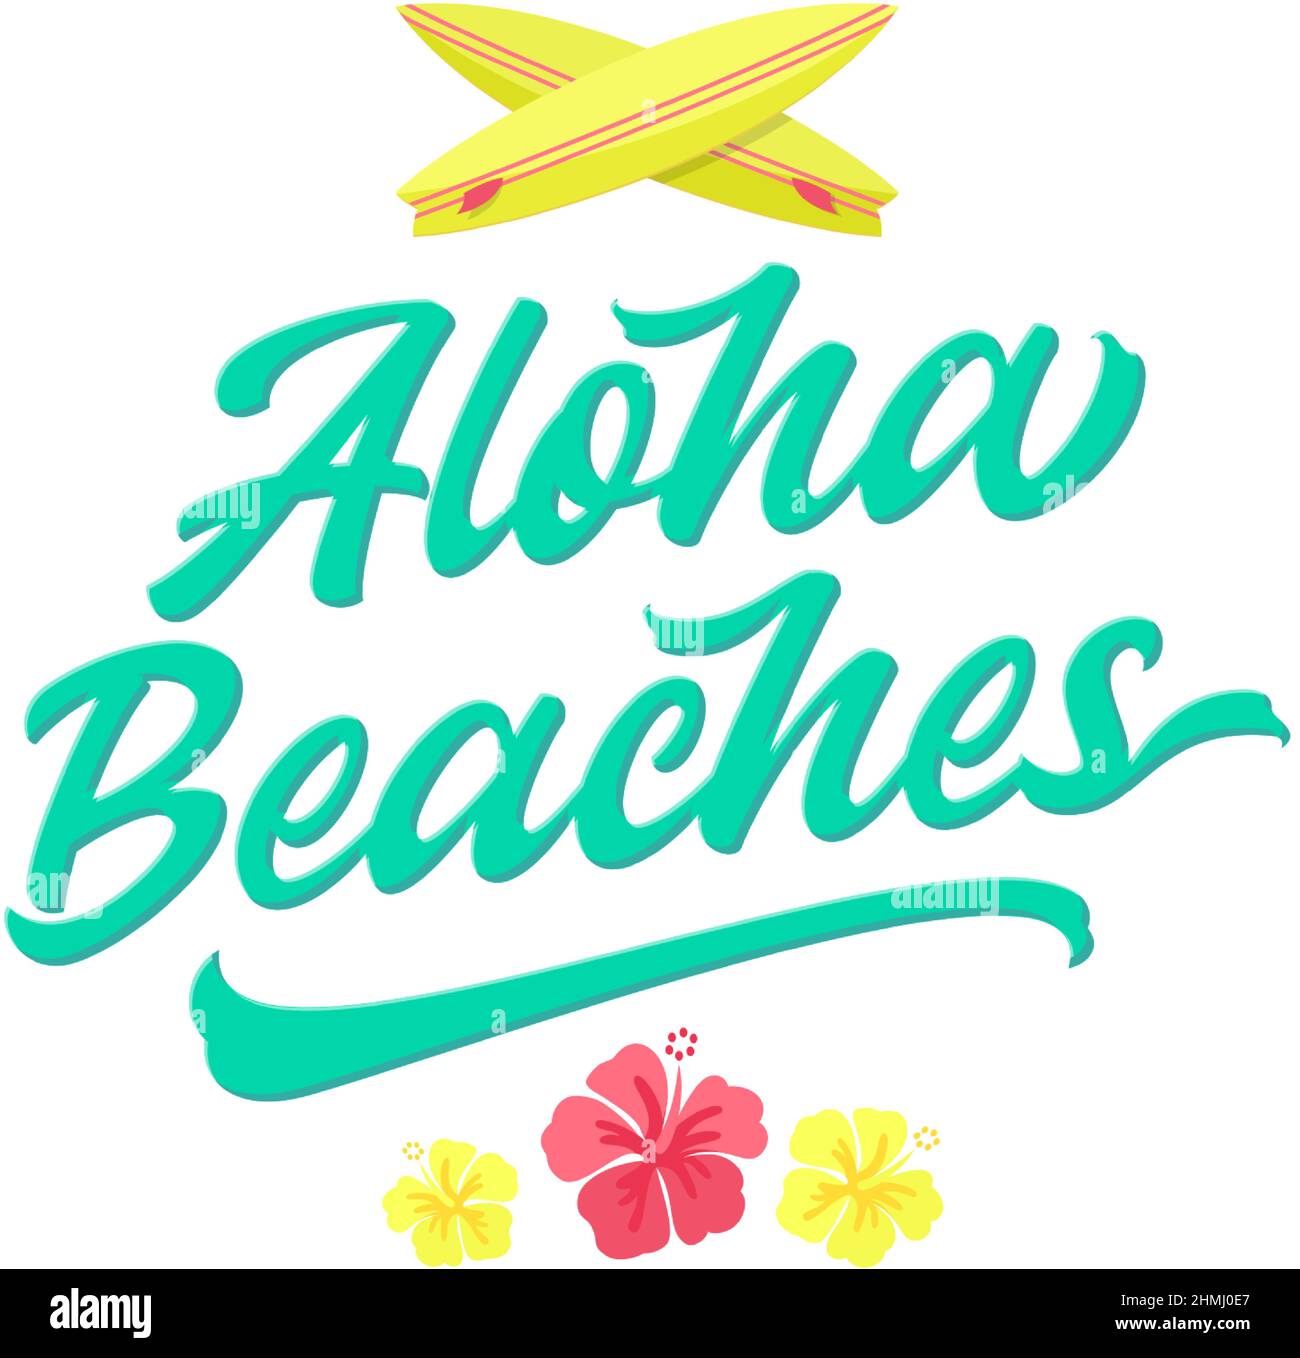 Aloha beaches lettering. Havaiian summer tropical sign, label, card template. Hibiscus flowers and surfing boards flat style decorative illustration Stock Vector